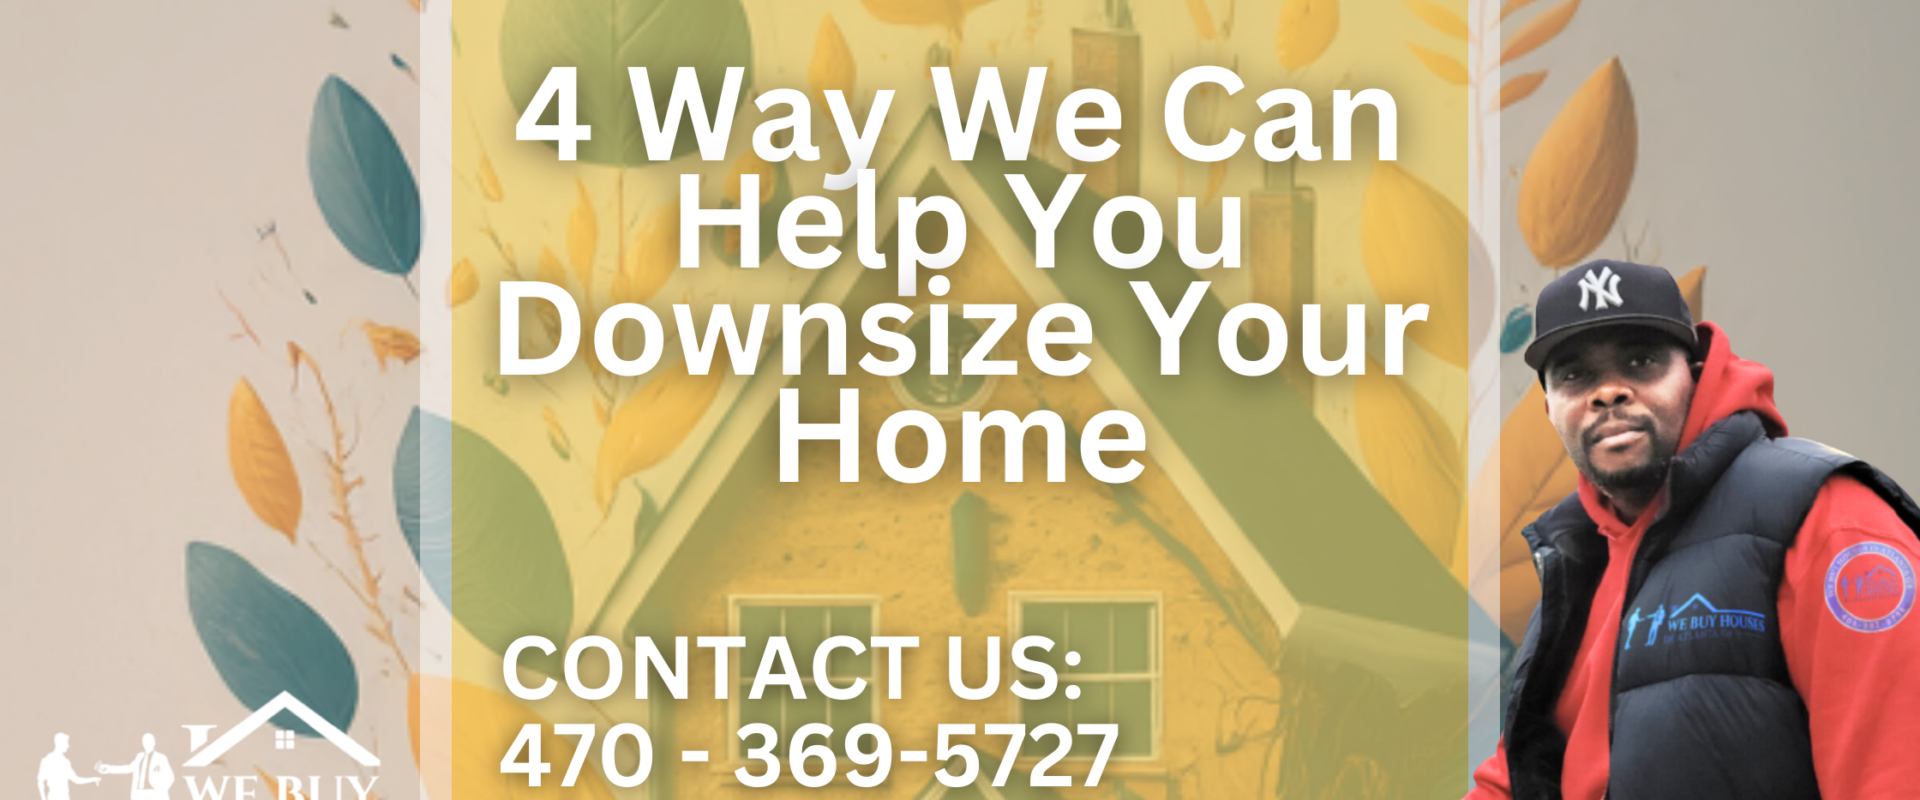 4-Way-We-Can-Help-You-Downsize-Your-Home